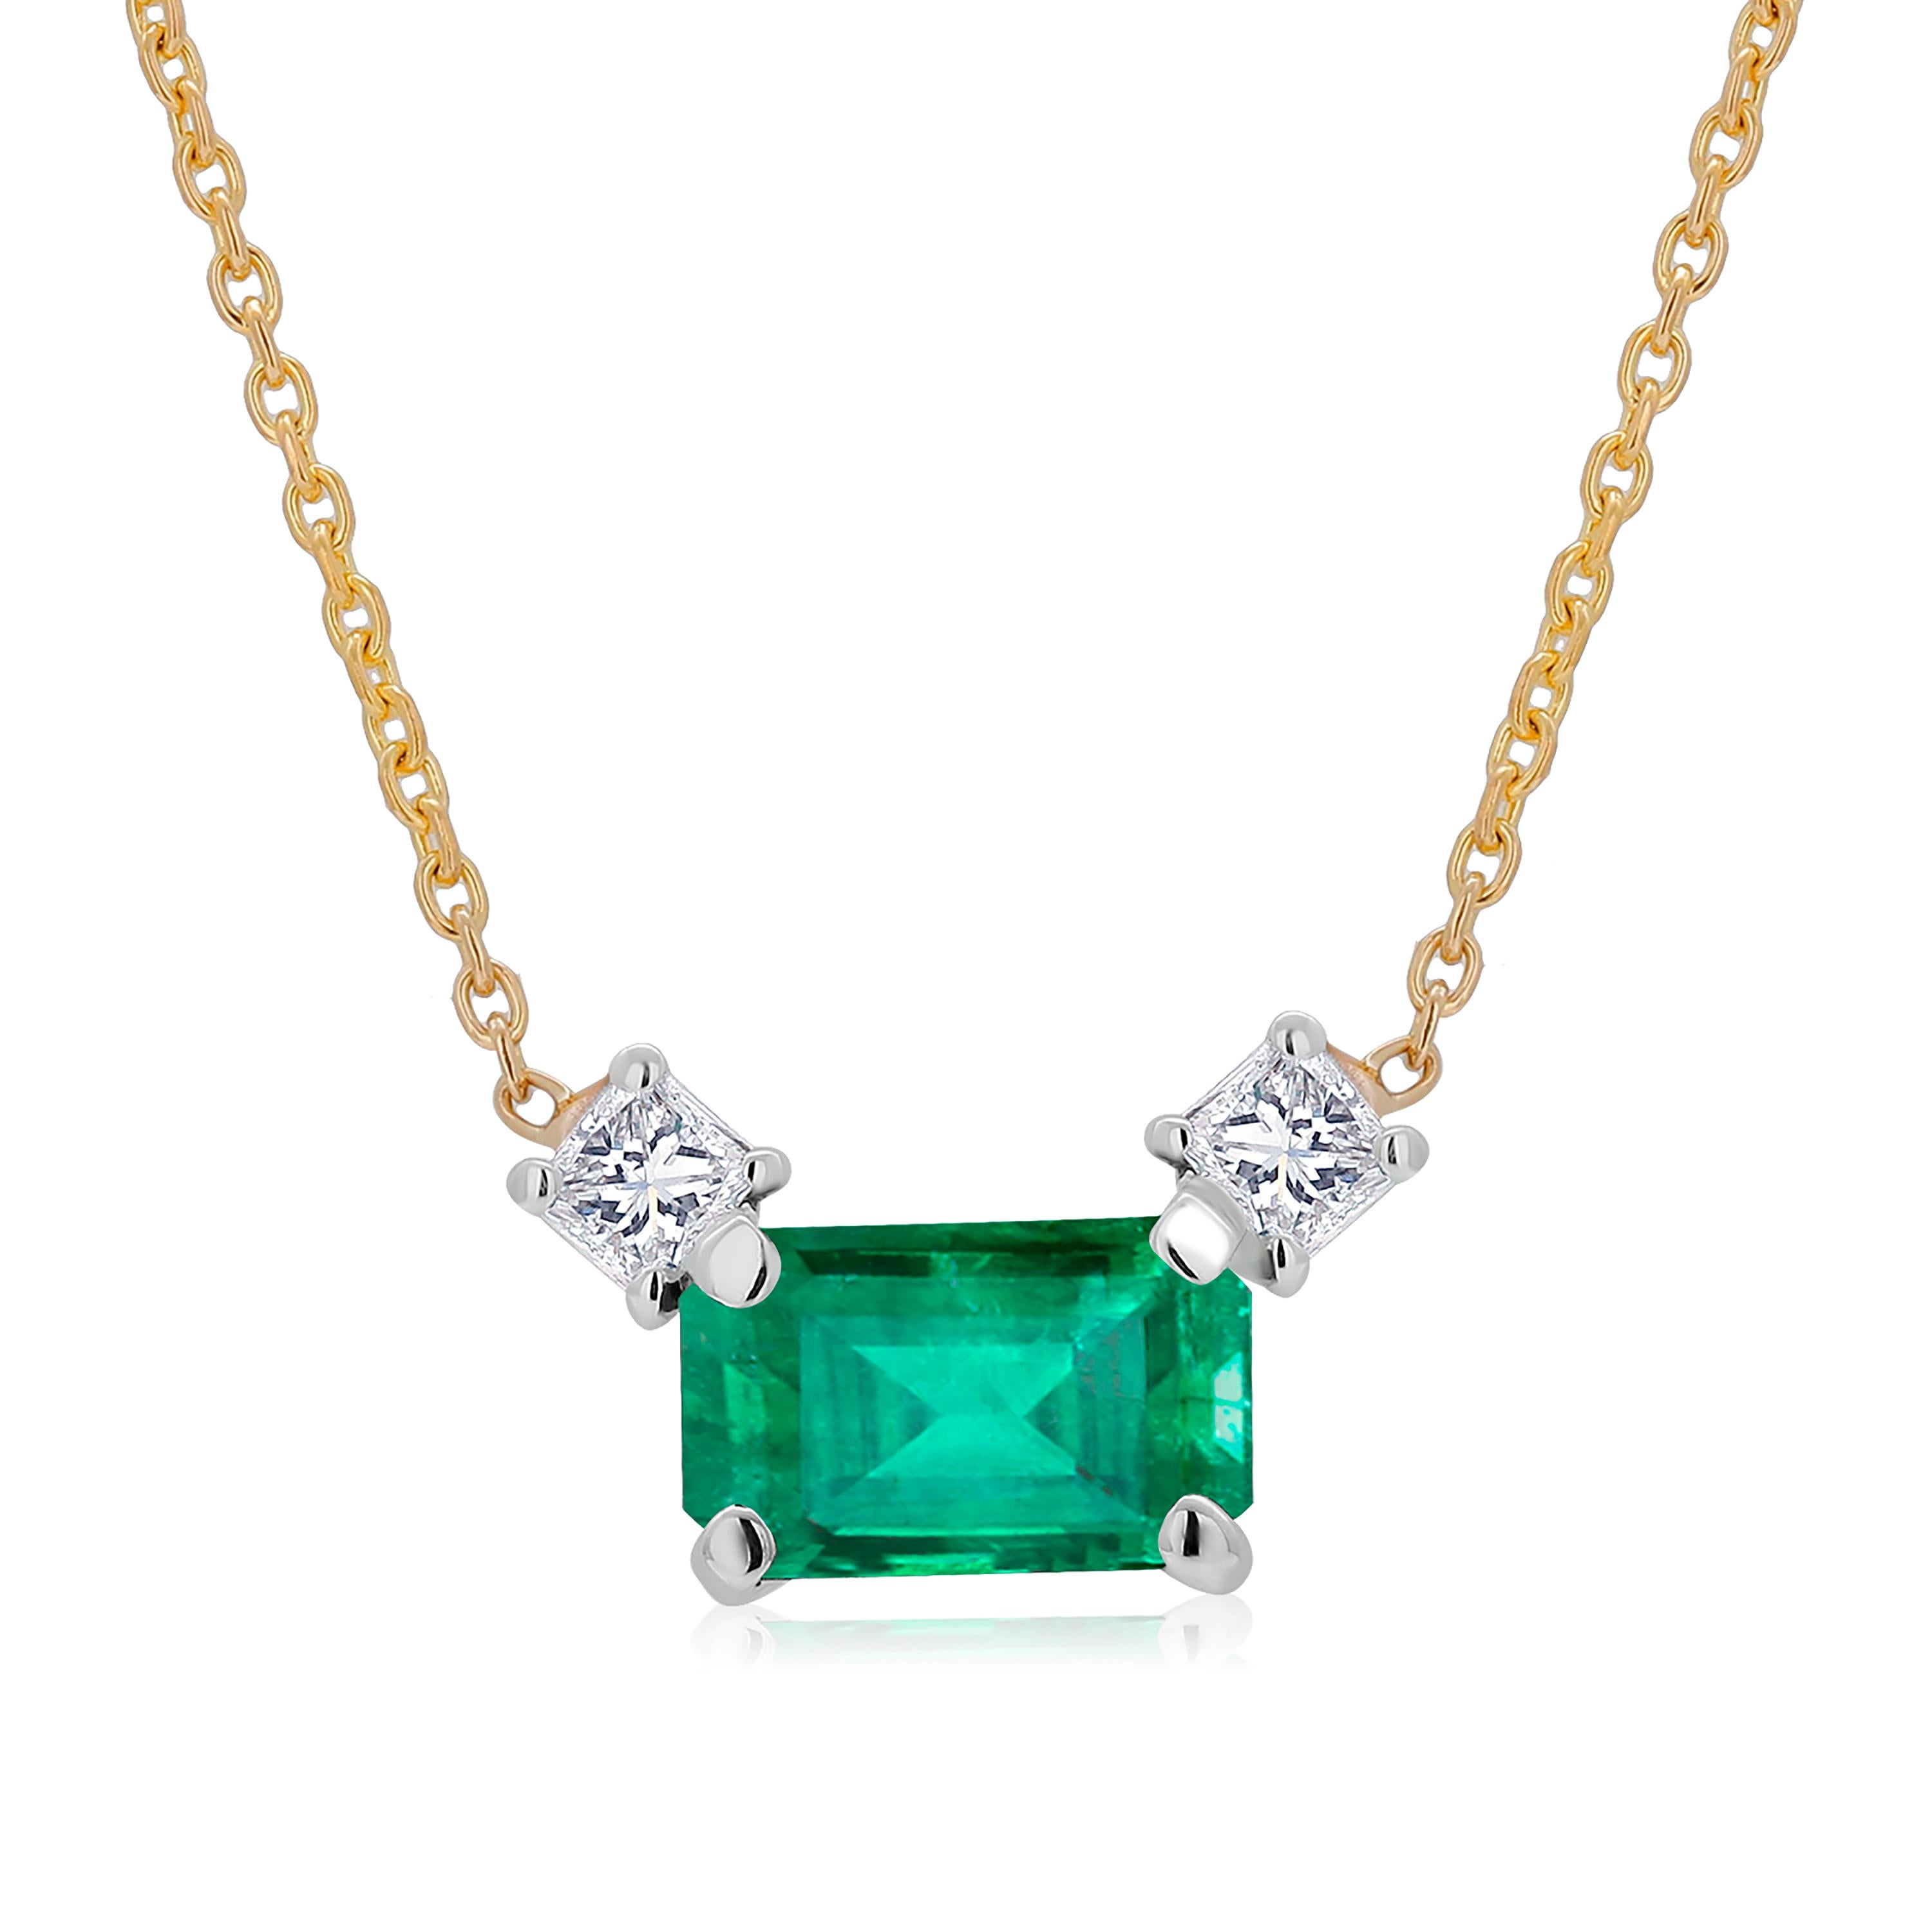 14 karats yellow and white gold necklace pendant with Colombia origin emerald
Necklace measuring 16 inches long
Emerald-shaped emerald weighing 0.76 carats
Two princesses shaped diamonds weighing 0.12 carats
Cable chain necklace with a spring